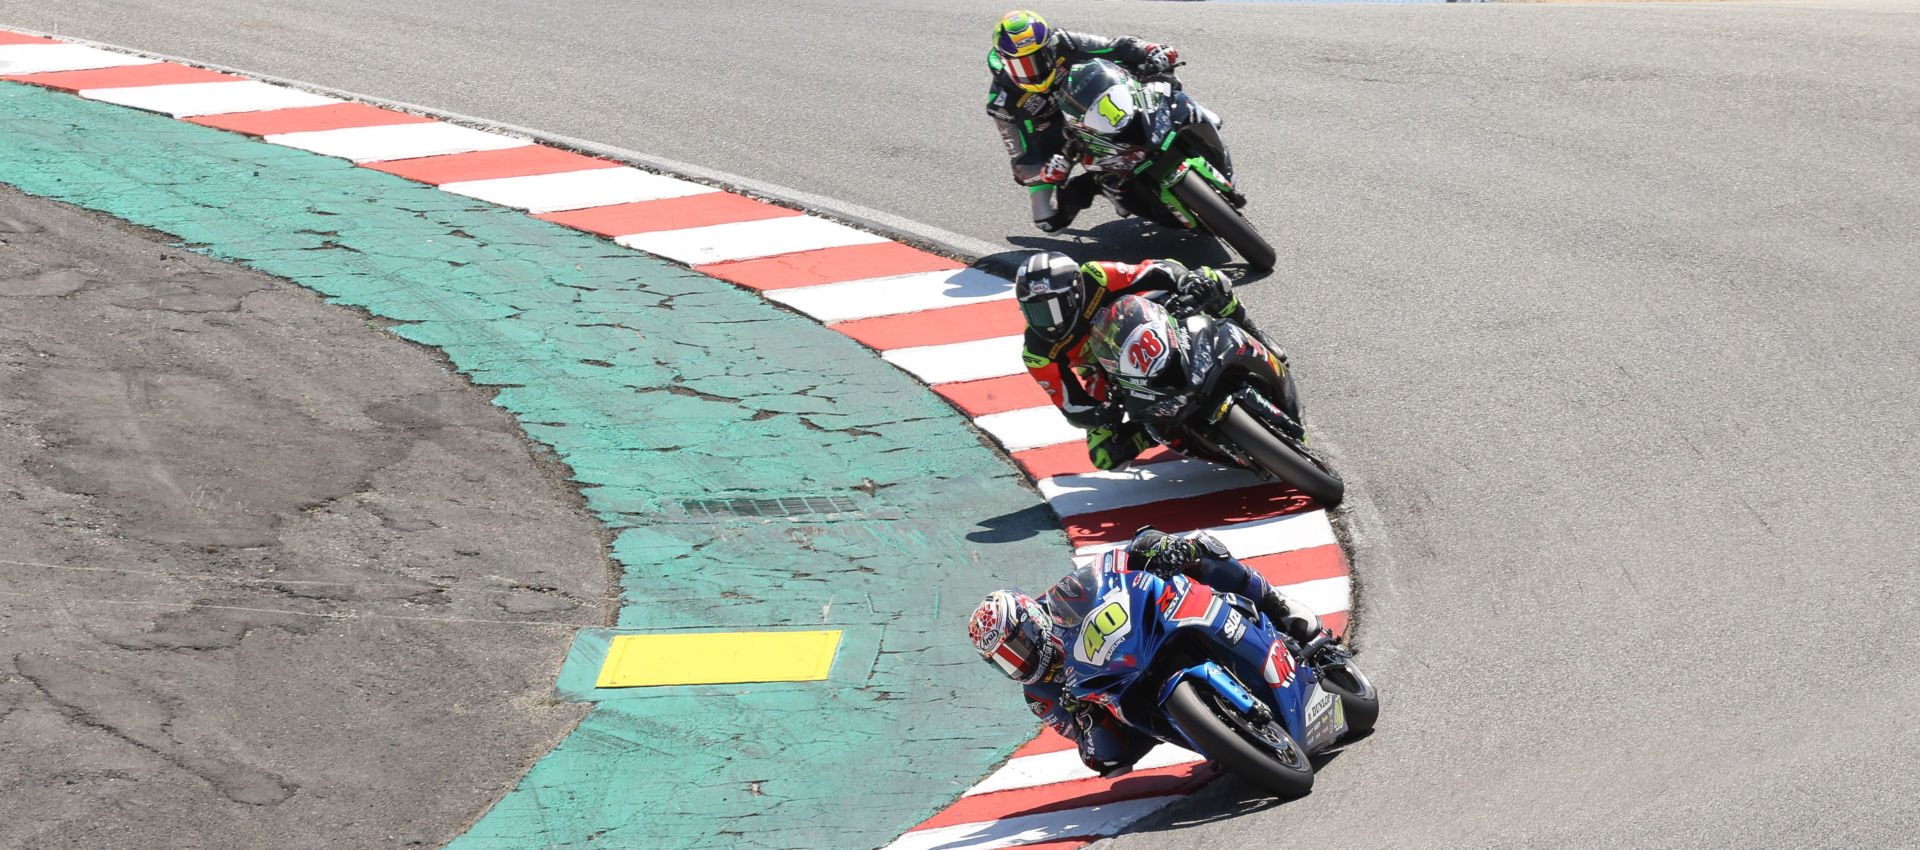 Cory Ventura (28) battling with Sean Dylan Kelly (40) and Richie Escalante (1) for the lead during MotoAmerica Supersport Race Two at Laguna Seca in 2021. Photo by Brian J. Nelson.